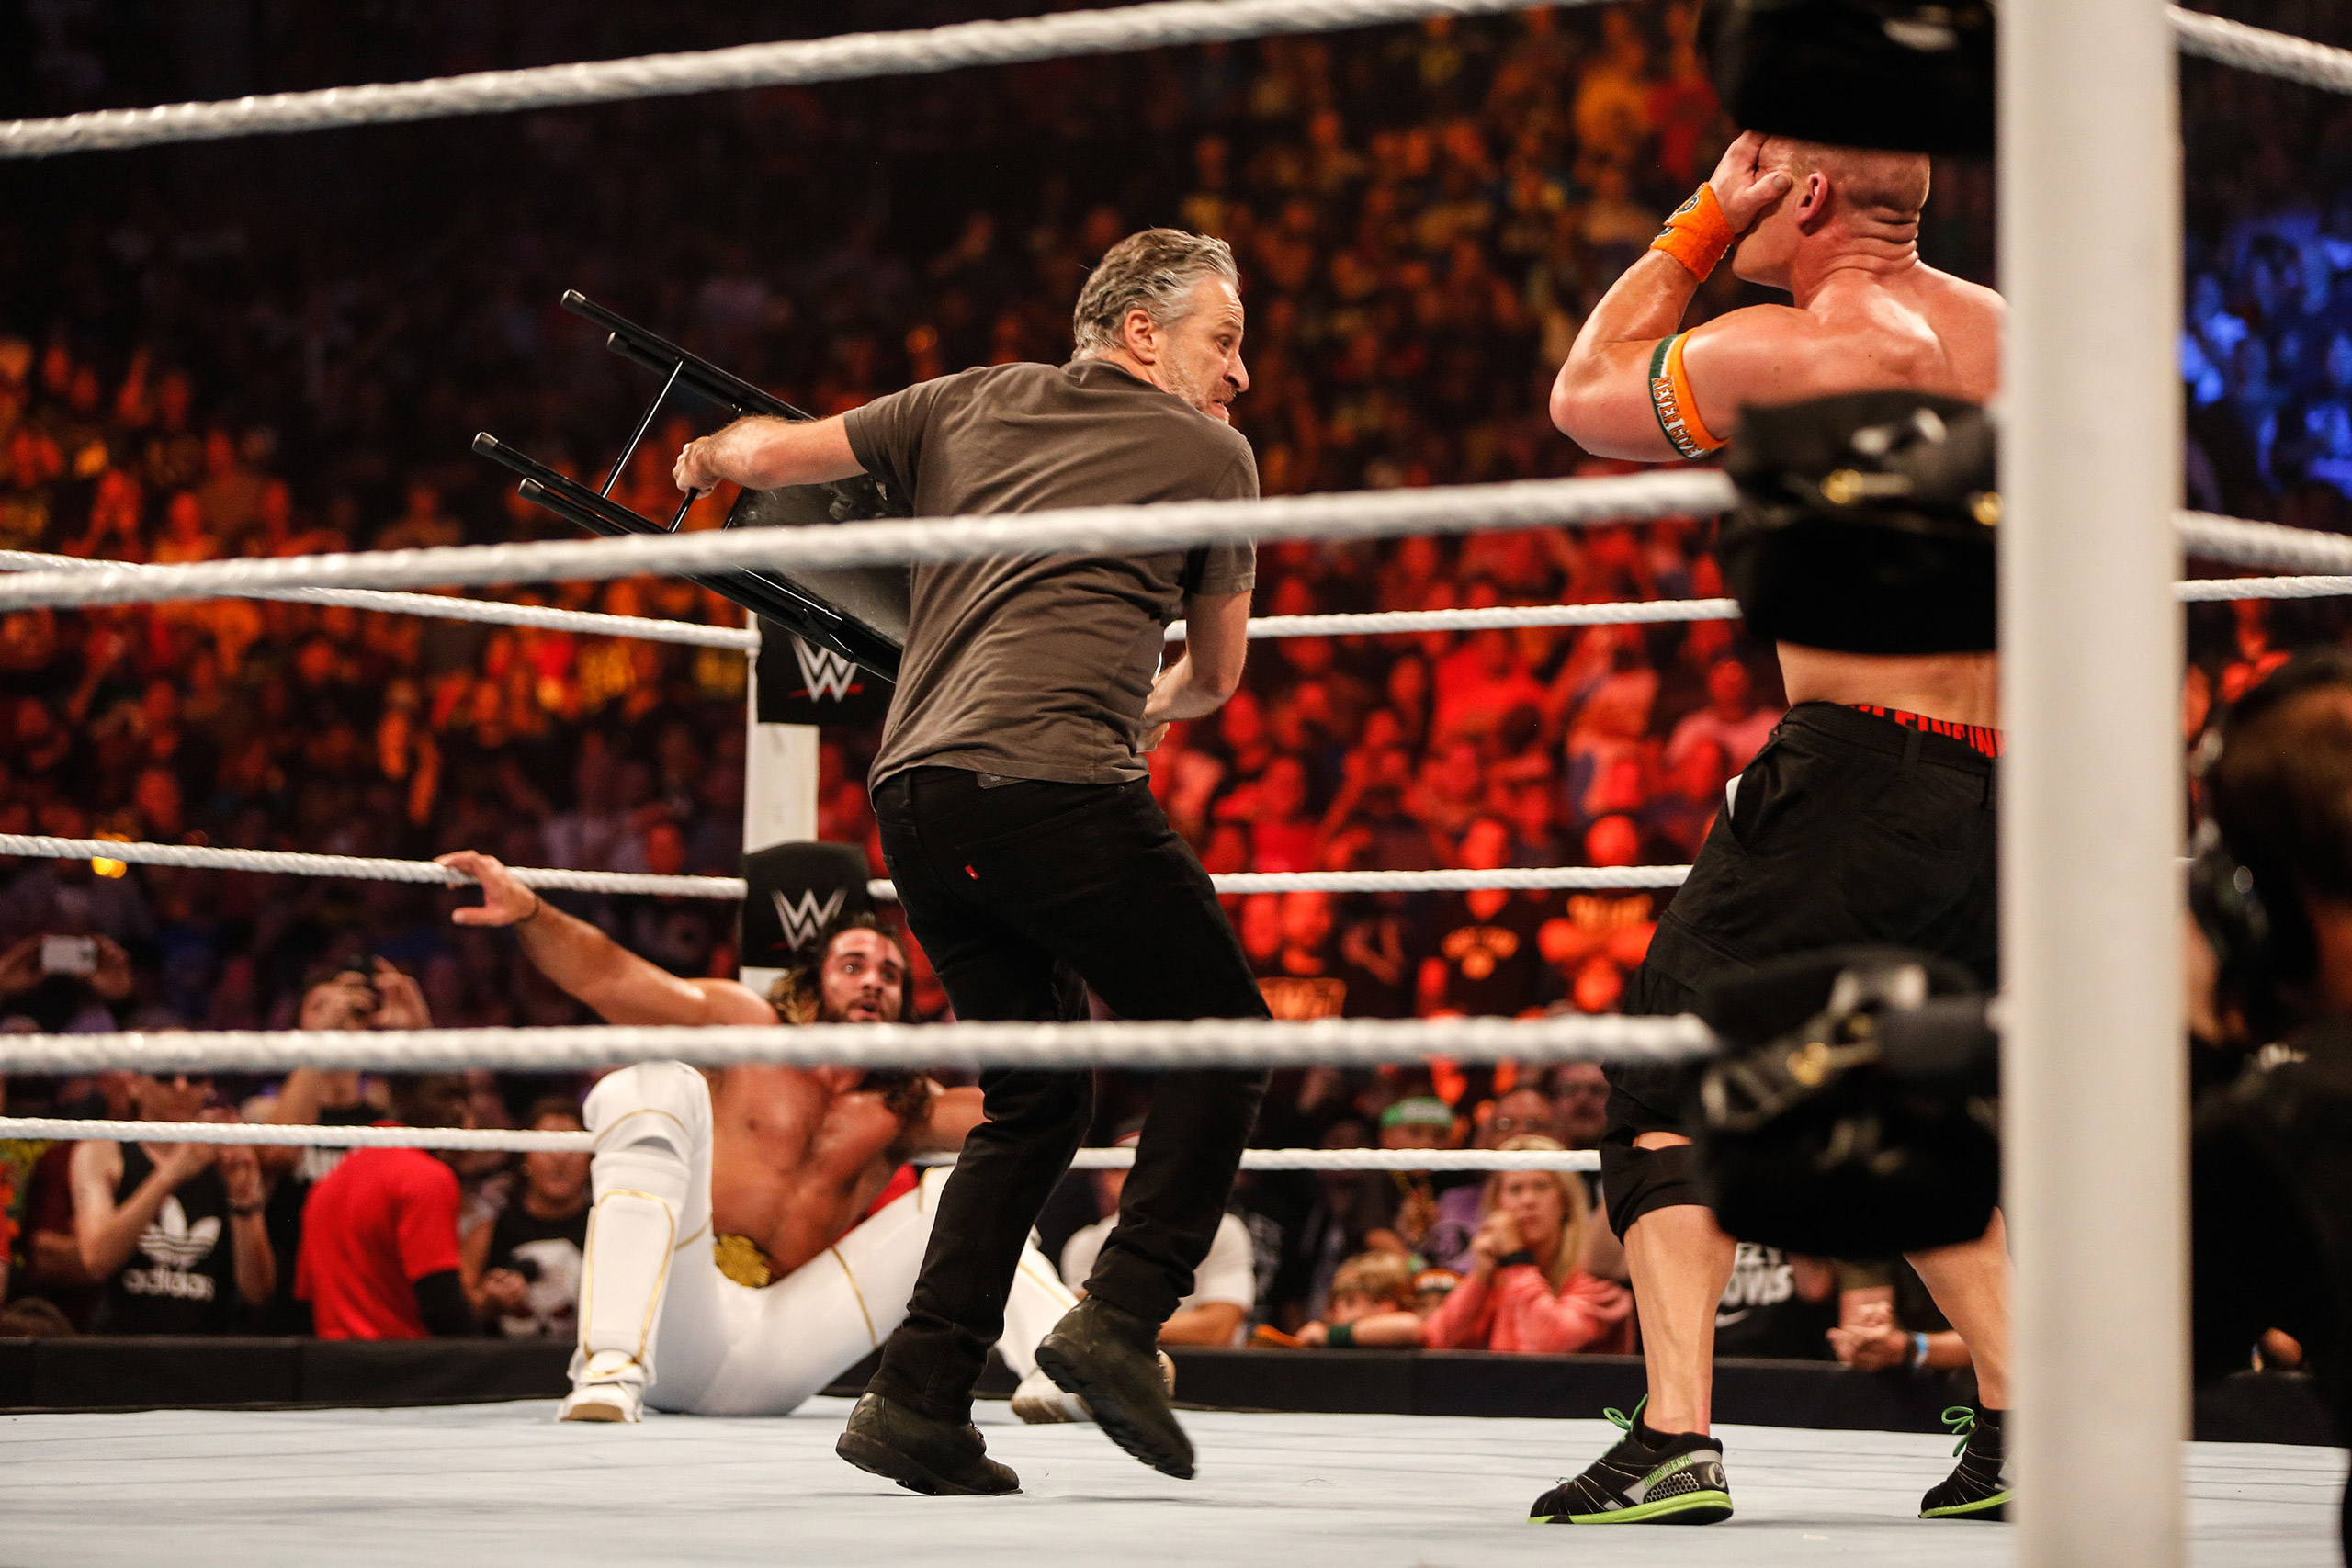 NEW YORK, NY - AUGUST 23:  Jon Stewart gets into the action at WWE SummerSlam 2015 Barclays Center of Brooklyn on August 23, 2015 in New York City.  (Photo by JP Yim/Getty Images)